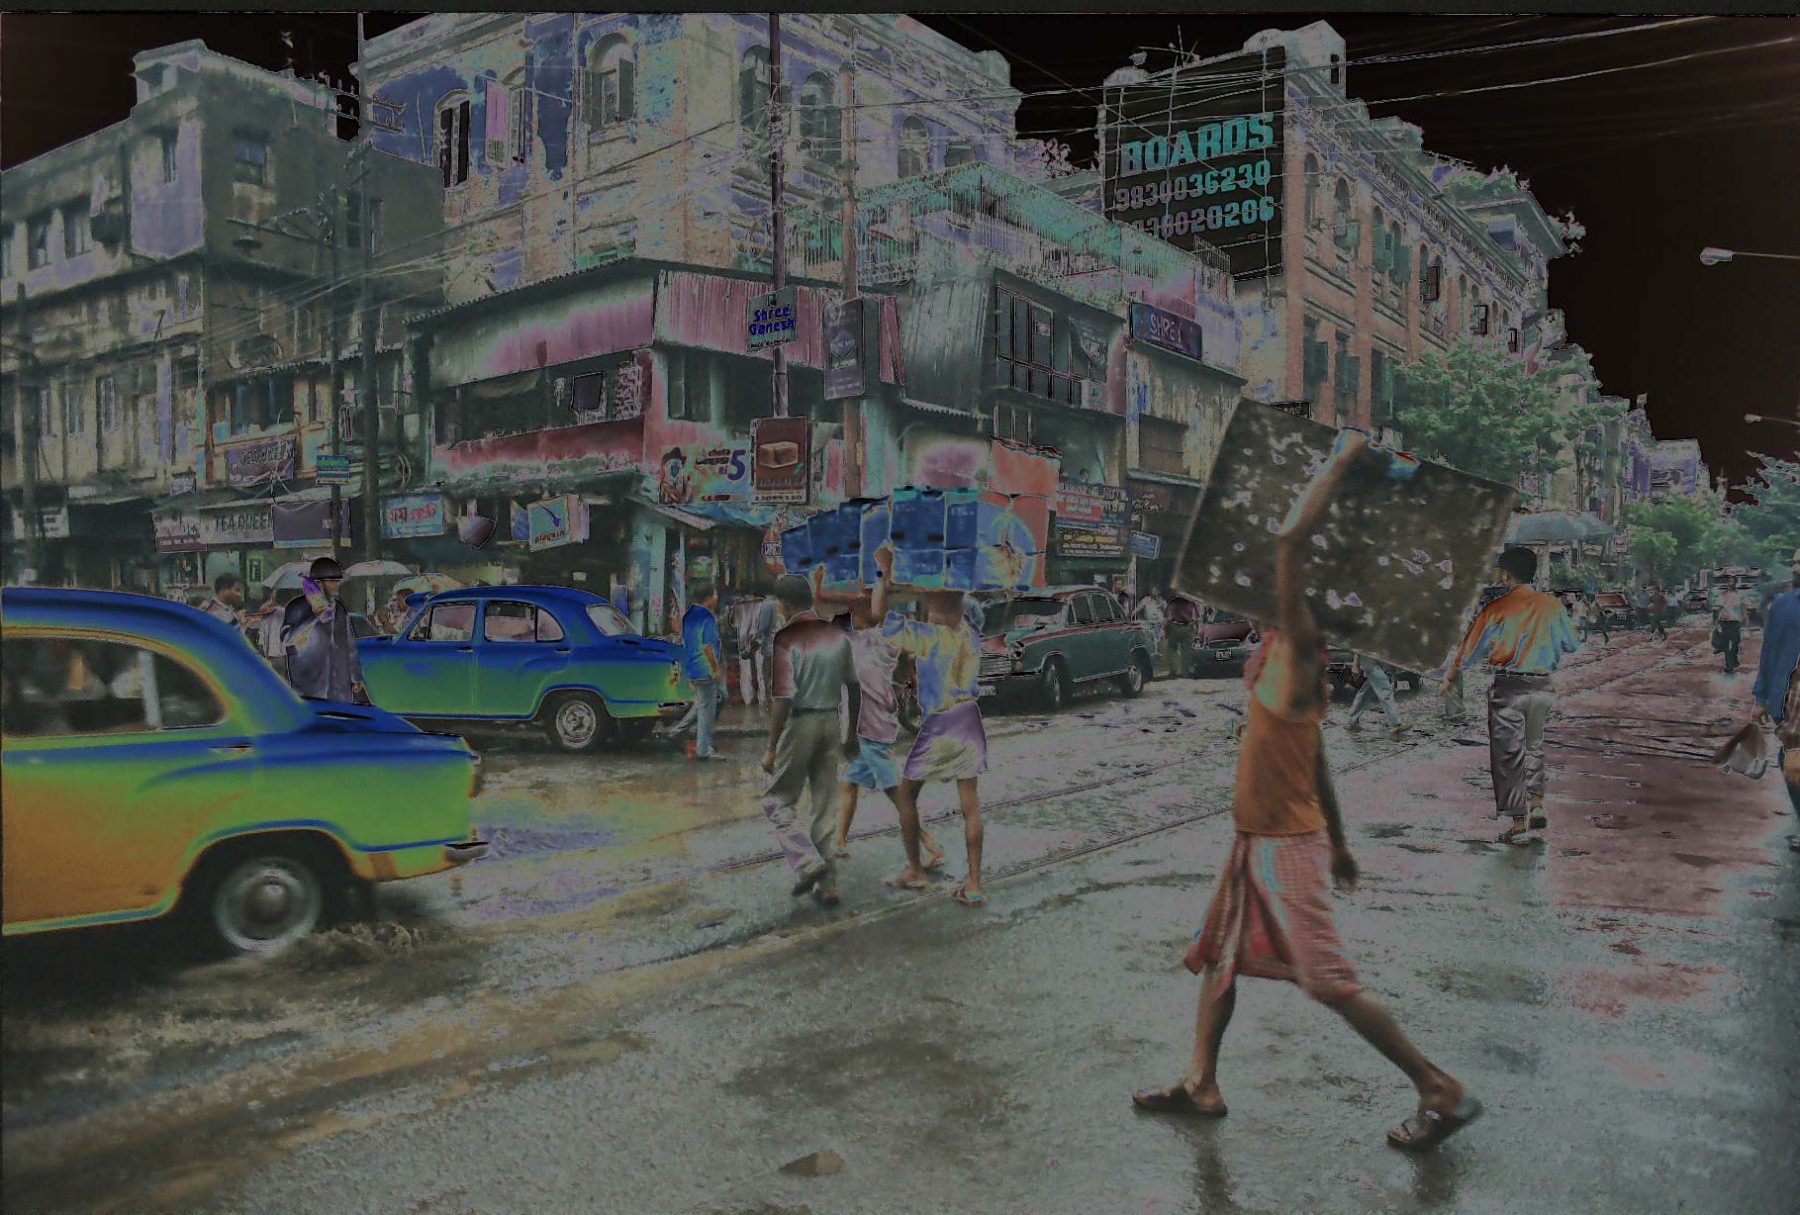 Flood in the Sky (Calcutta 1) (2005) photographic mixed media, 0.60H x 0.91W meters